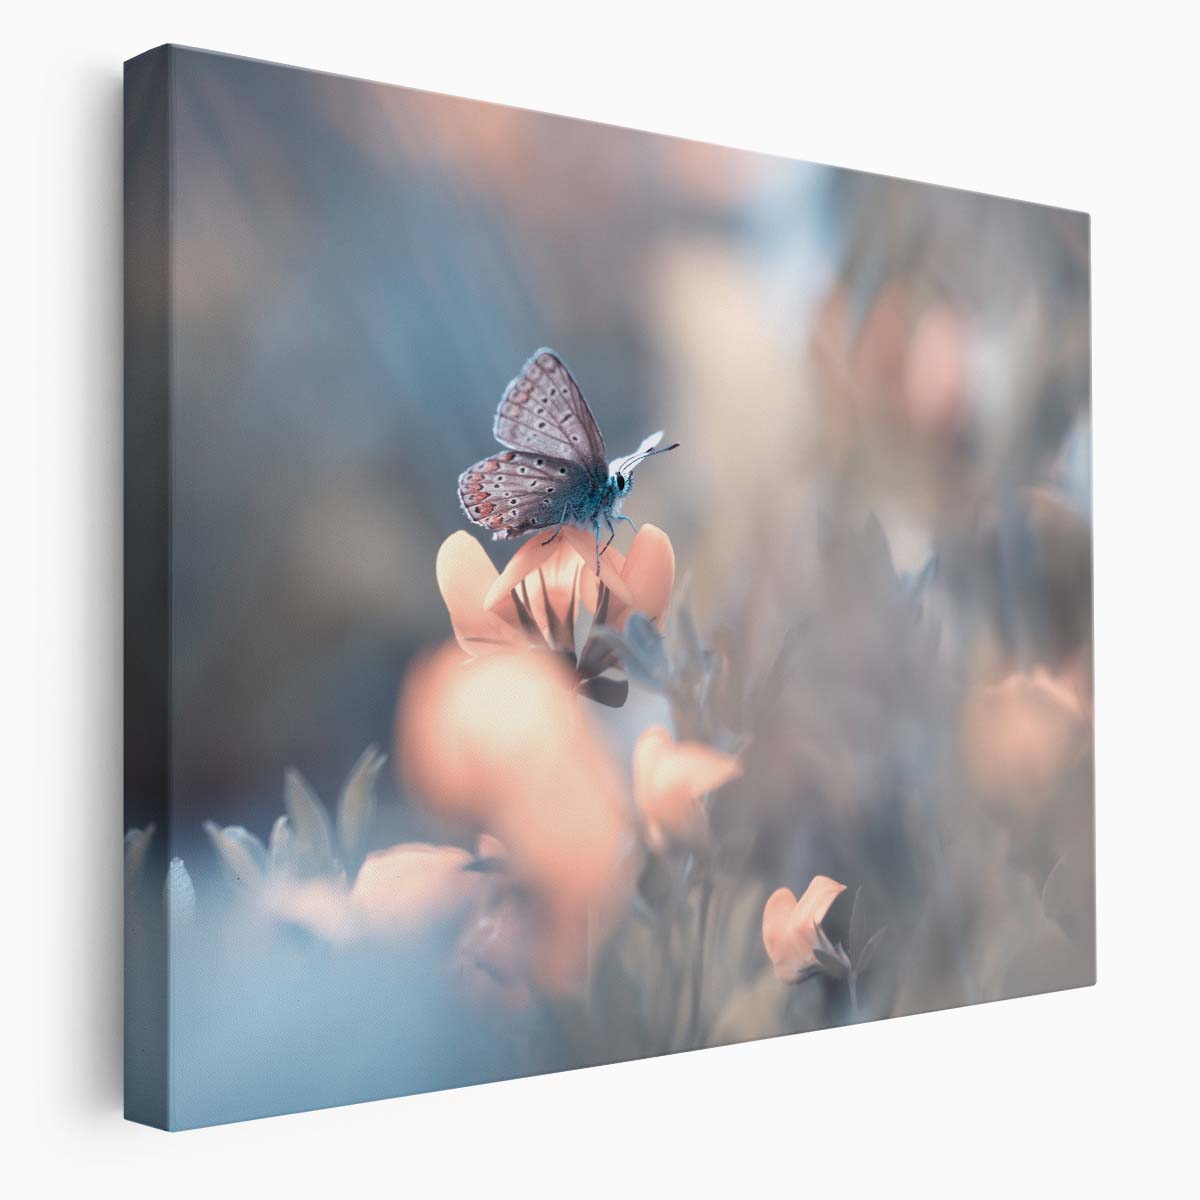 Macro Butterfly & Floral Garden Pastel Wall Art by Luxuriance Designs. Made in USA.